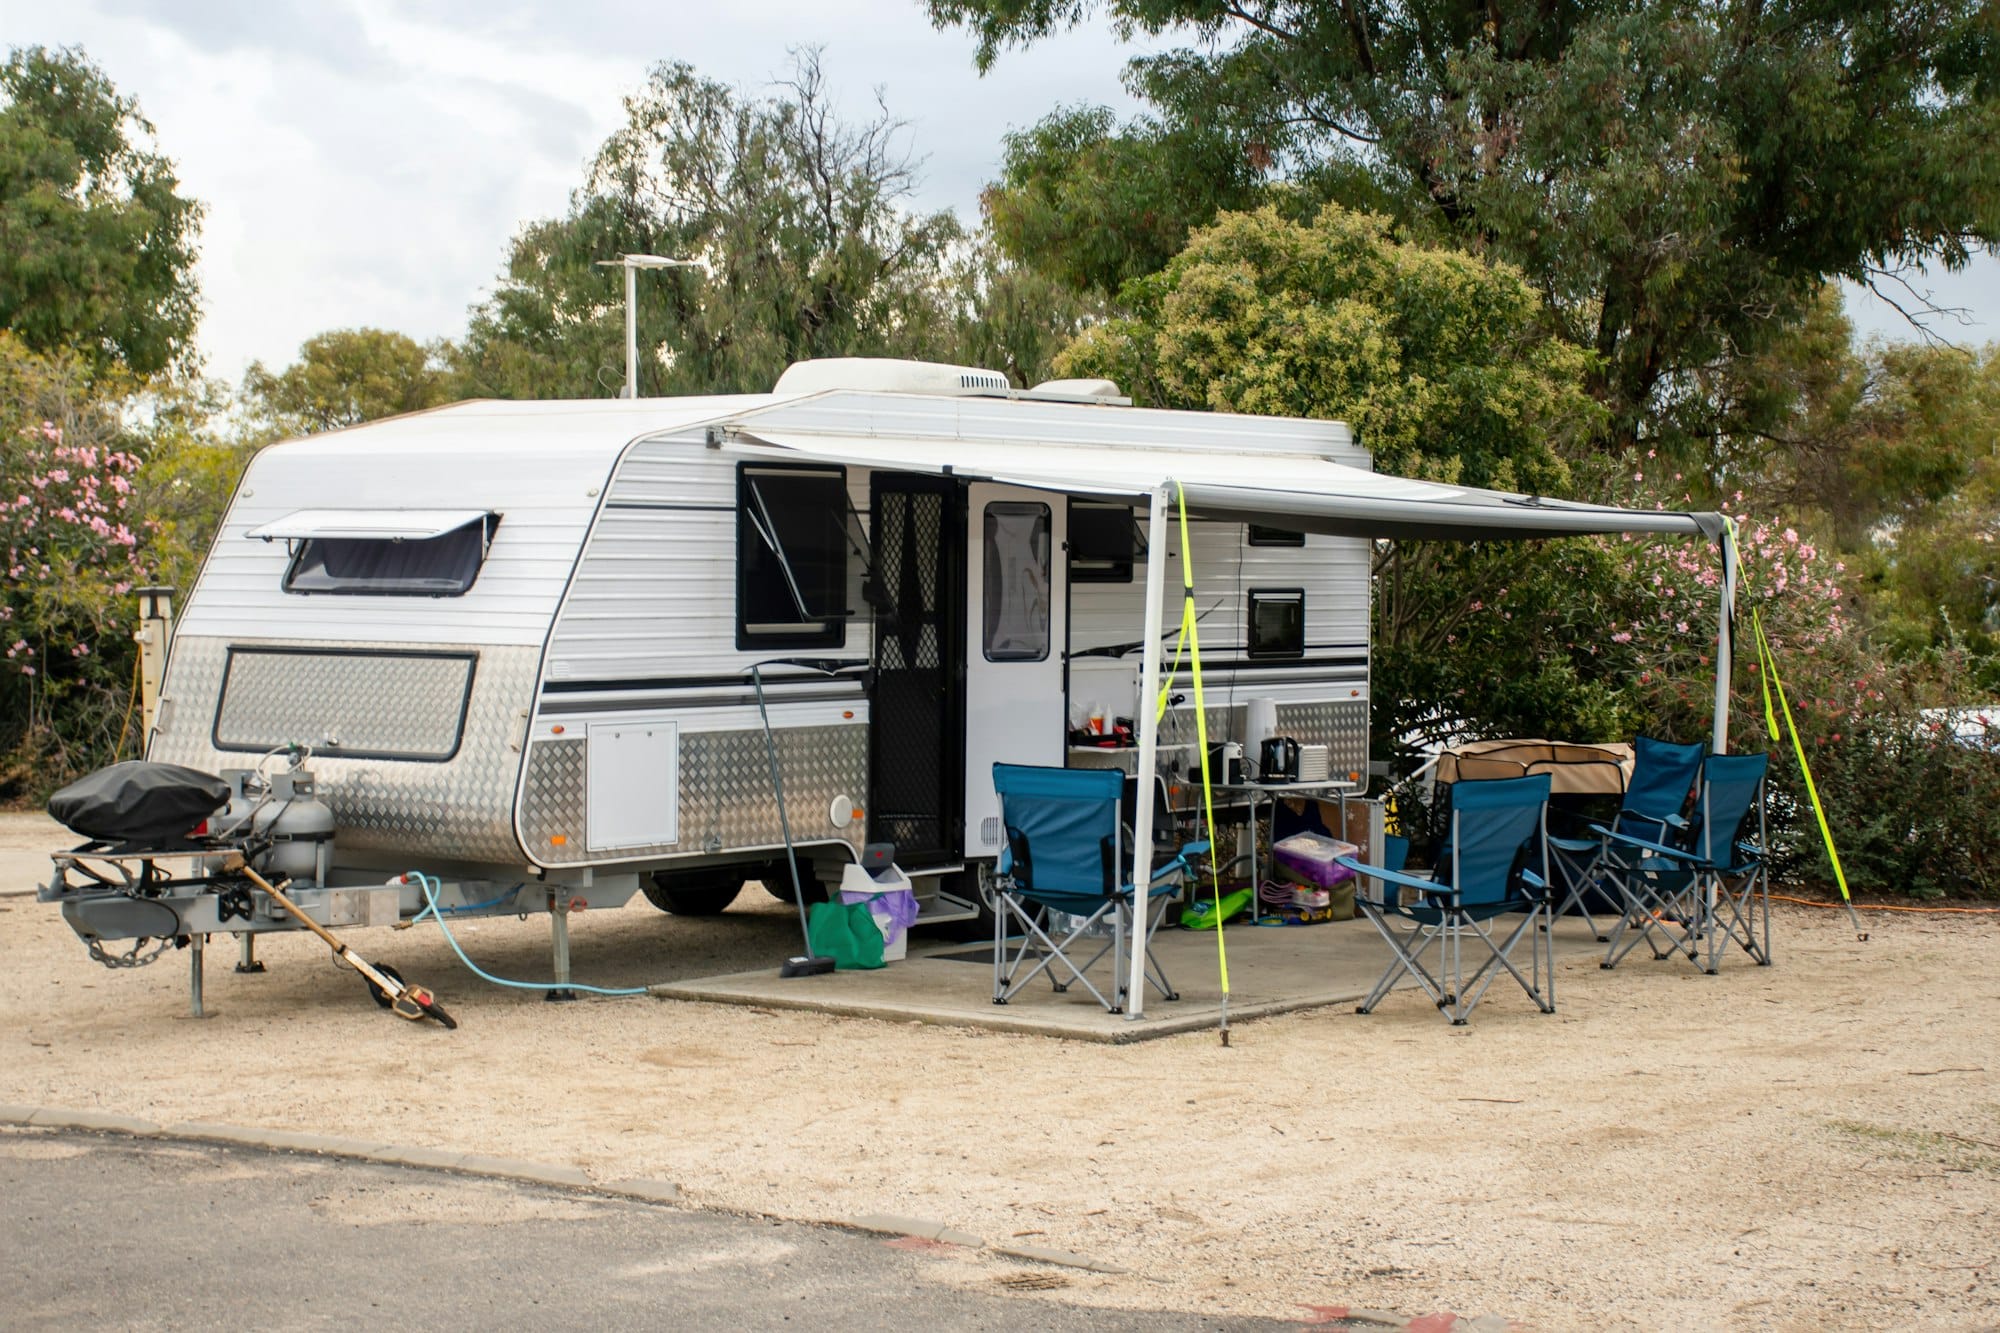 A silver travel trailer with an extended awning is set up at a campsite with several blue folding chairs and camping equipment arranged outside. Among the gear, the best RV water softener ensures fresh, clean water while trees and bushes surround the area.